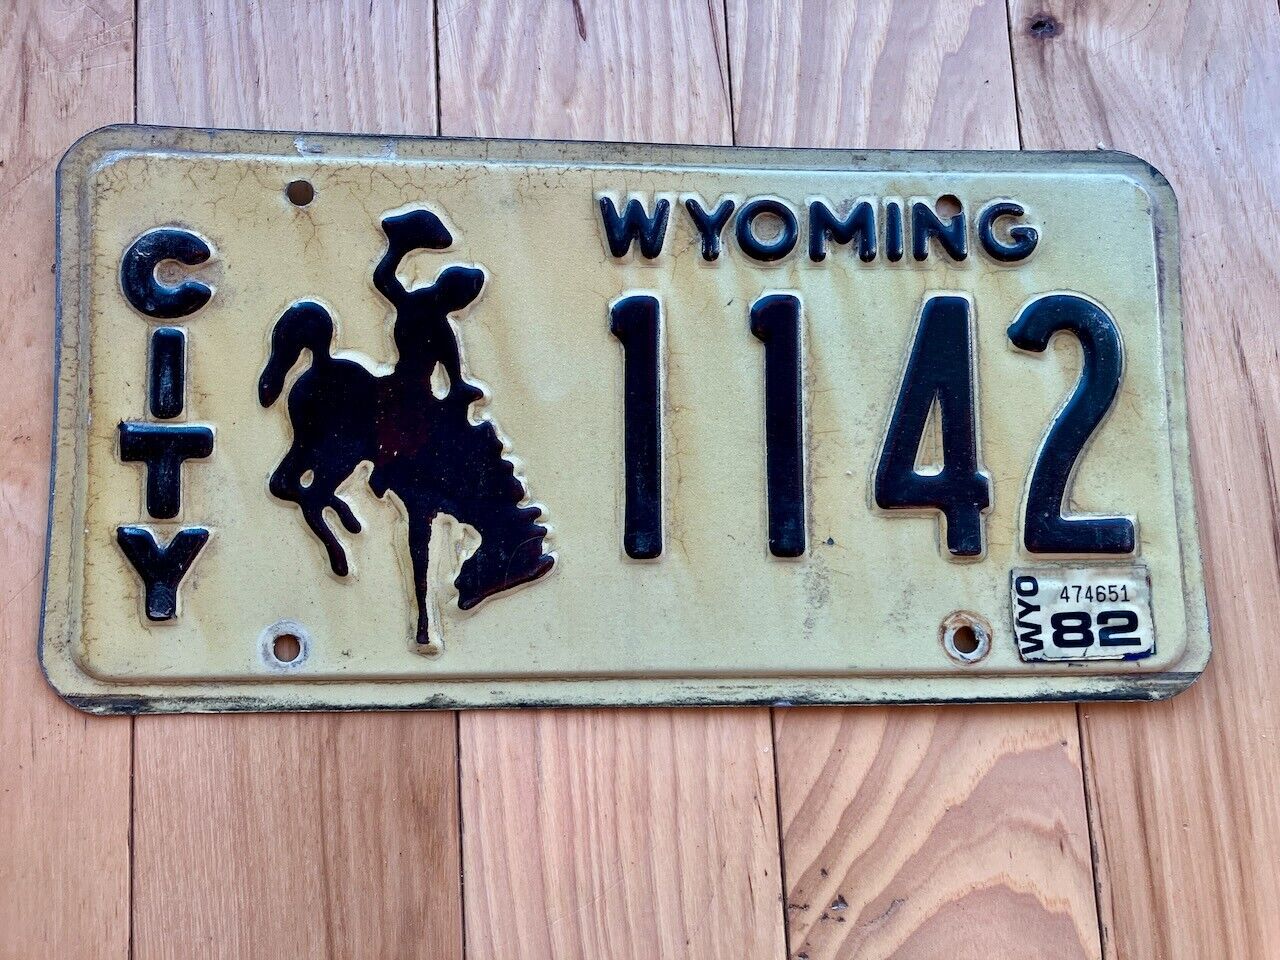 1982 Wyoming City License Plate